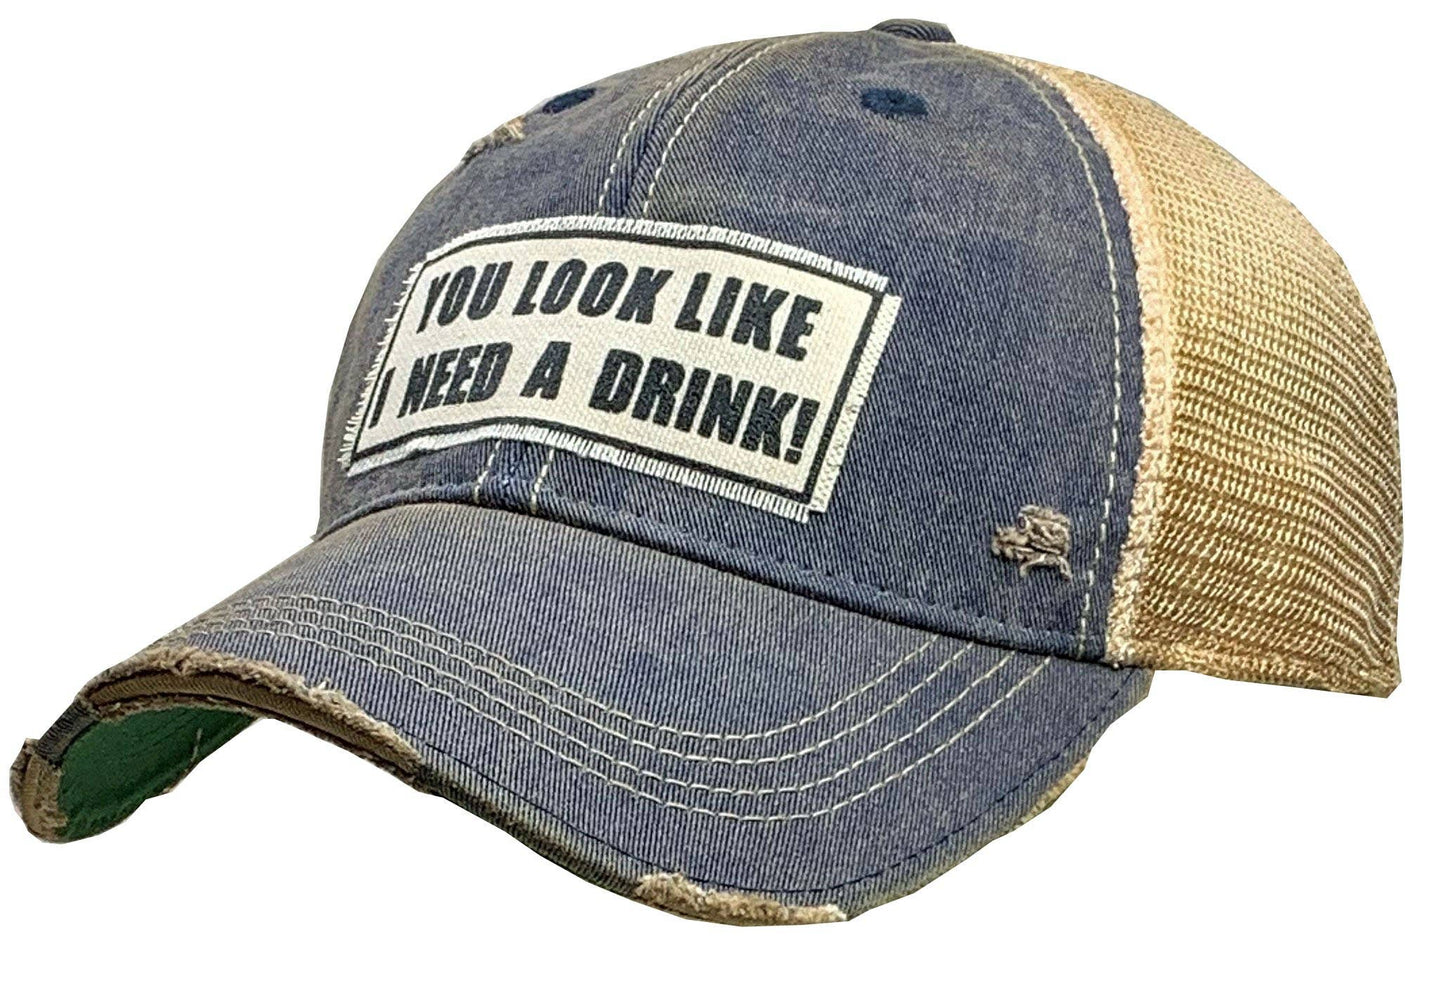 You Look Like I Need A Drink Distressed Trucker Cap